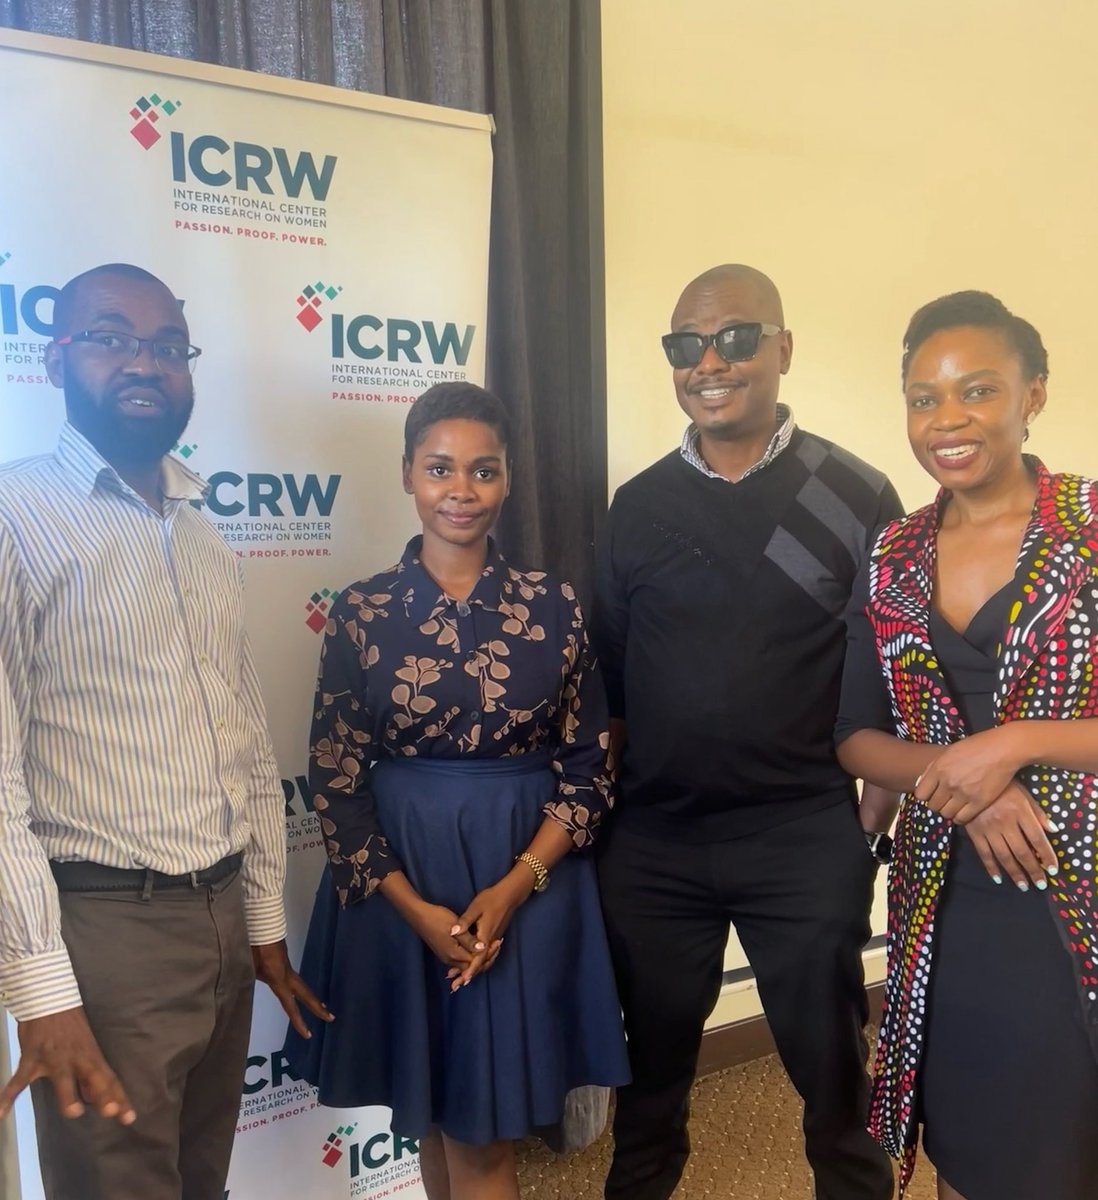 Honored to have been apart of this Project Inception Meeting by @ICRWAfrica,an organization that works with partners to conduct empirical research,to inform policies and programs seeking to alleviate poverty, promote gender equality and protect the rights of women and girls.